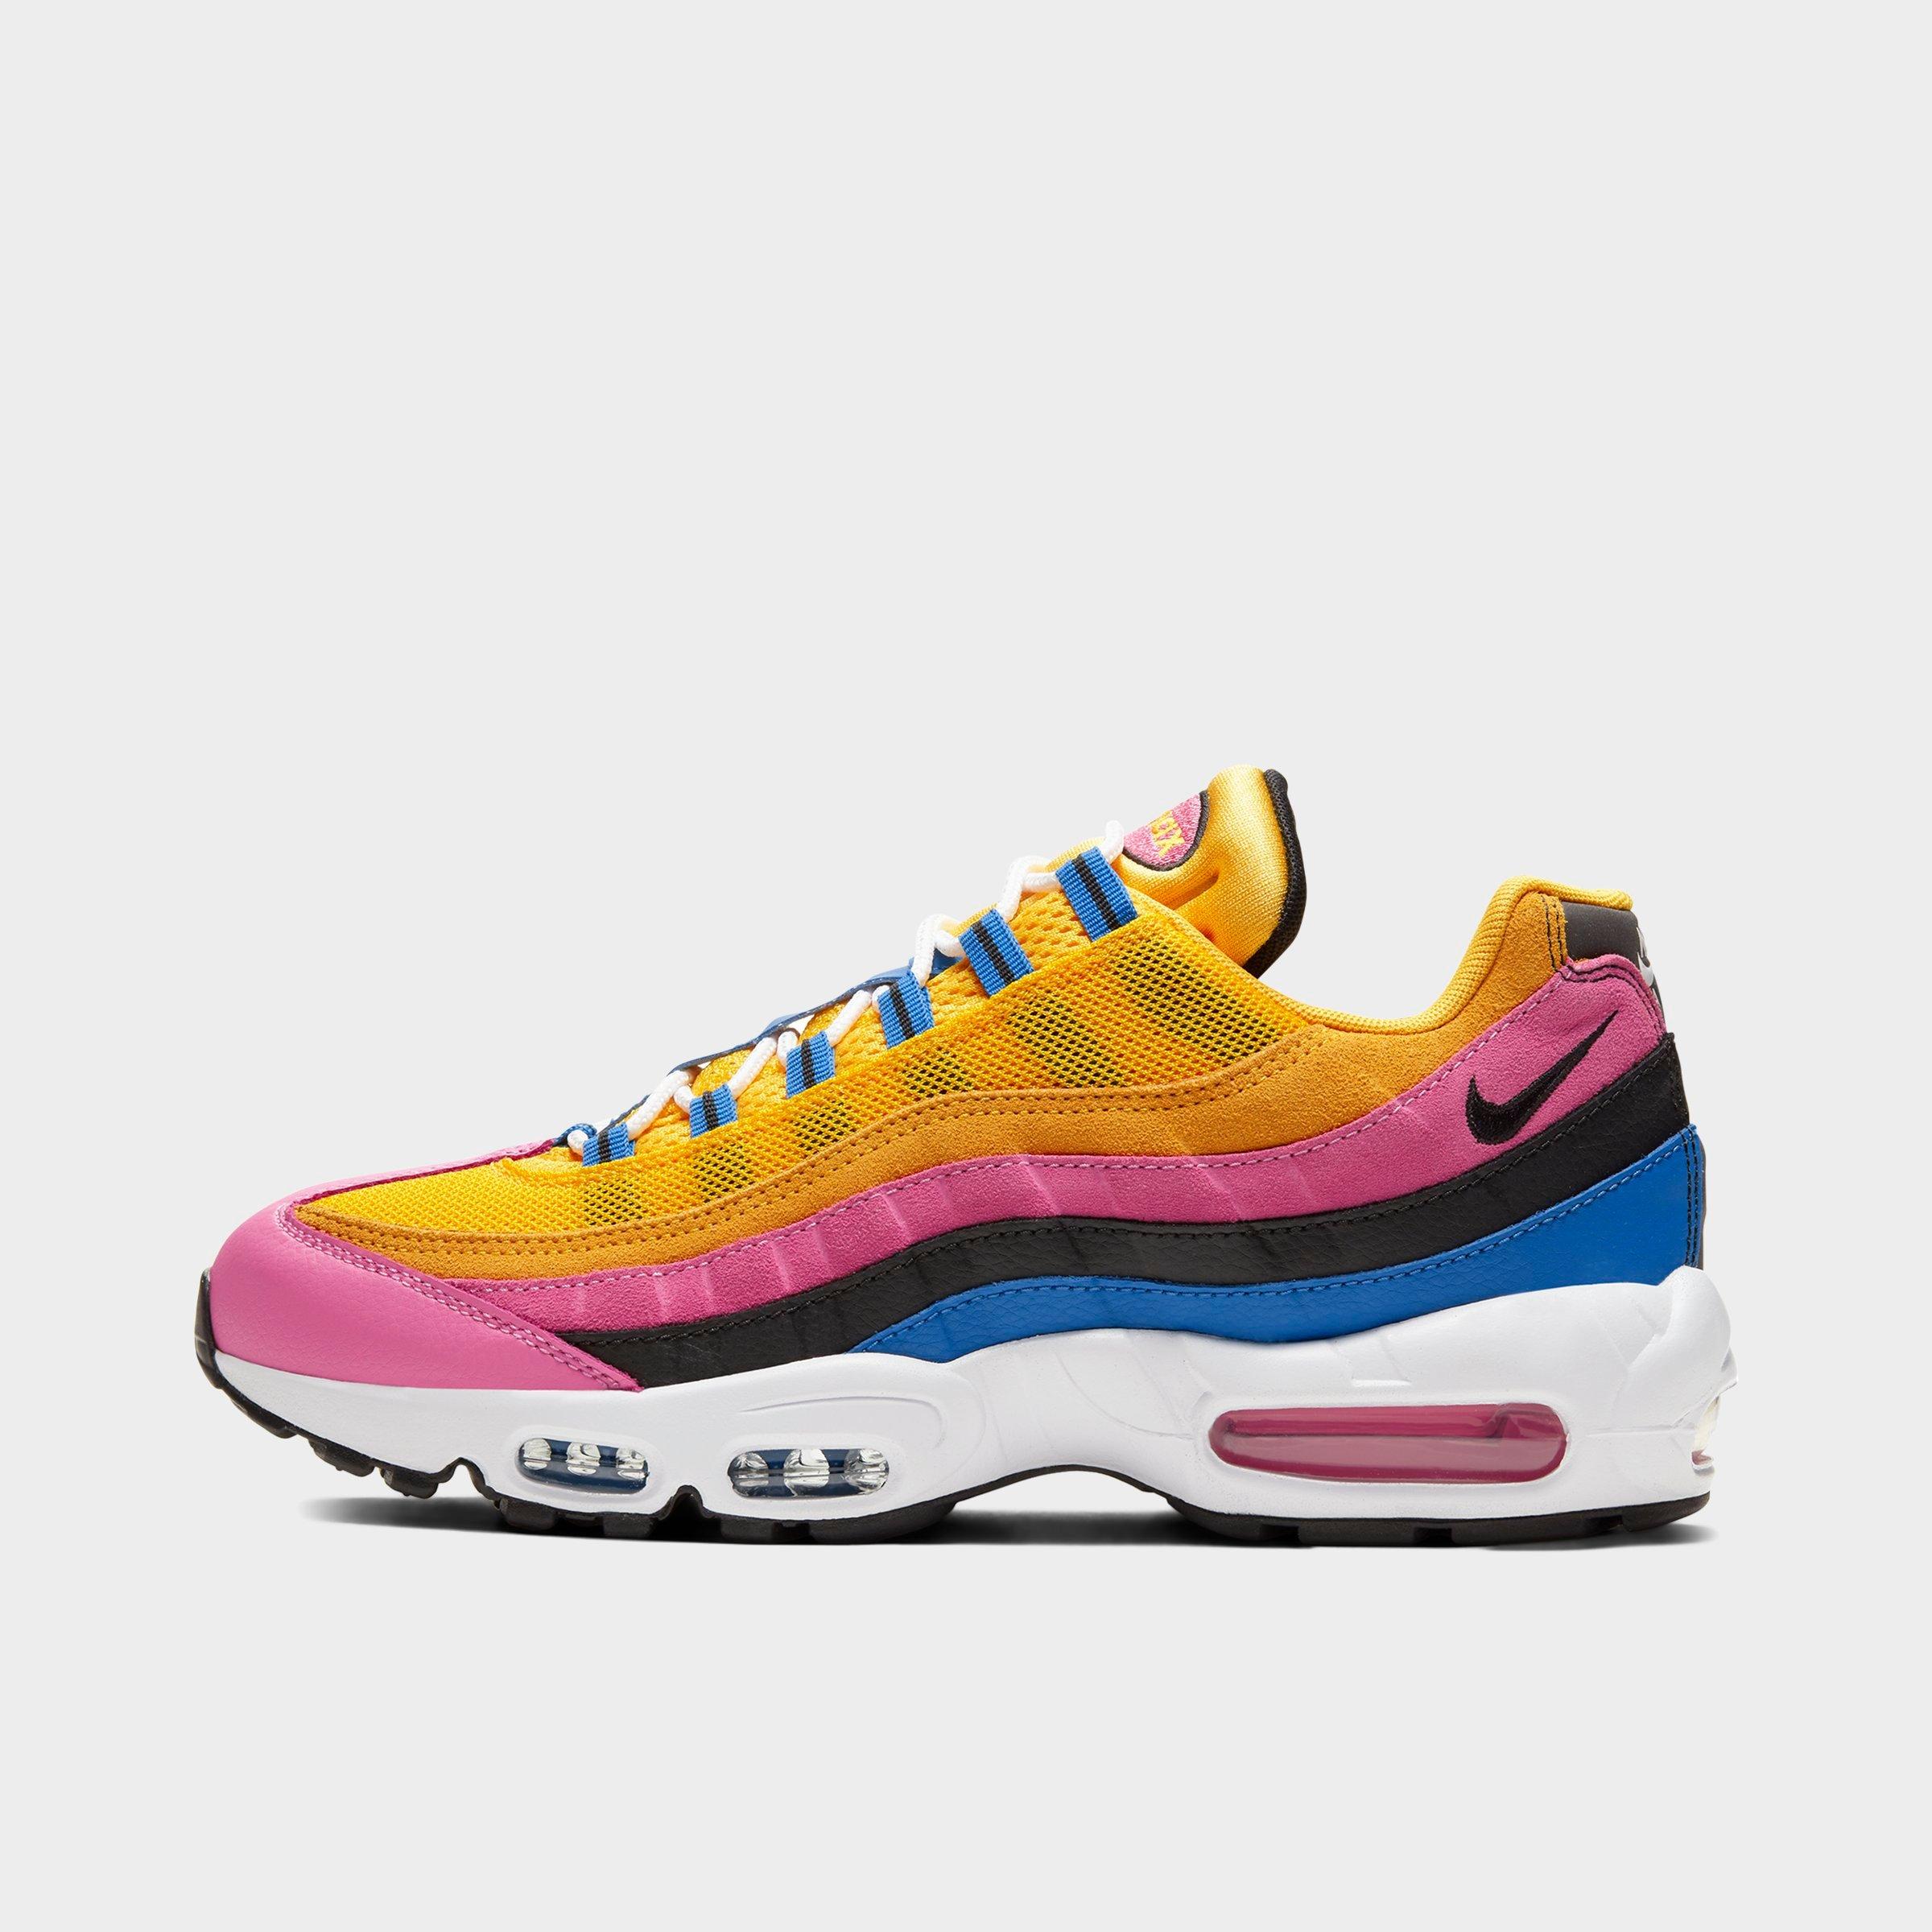 air max on sale at finish line cheap online